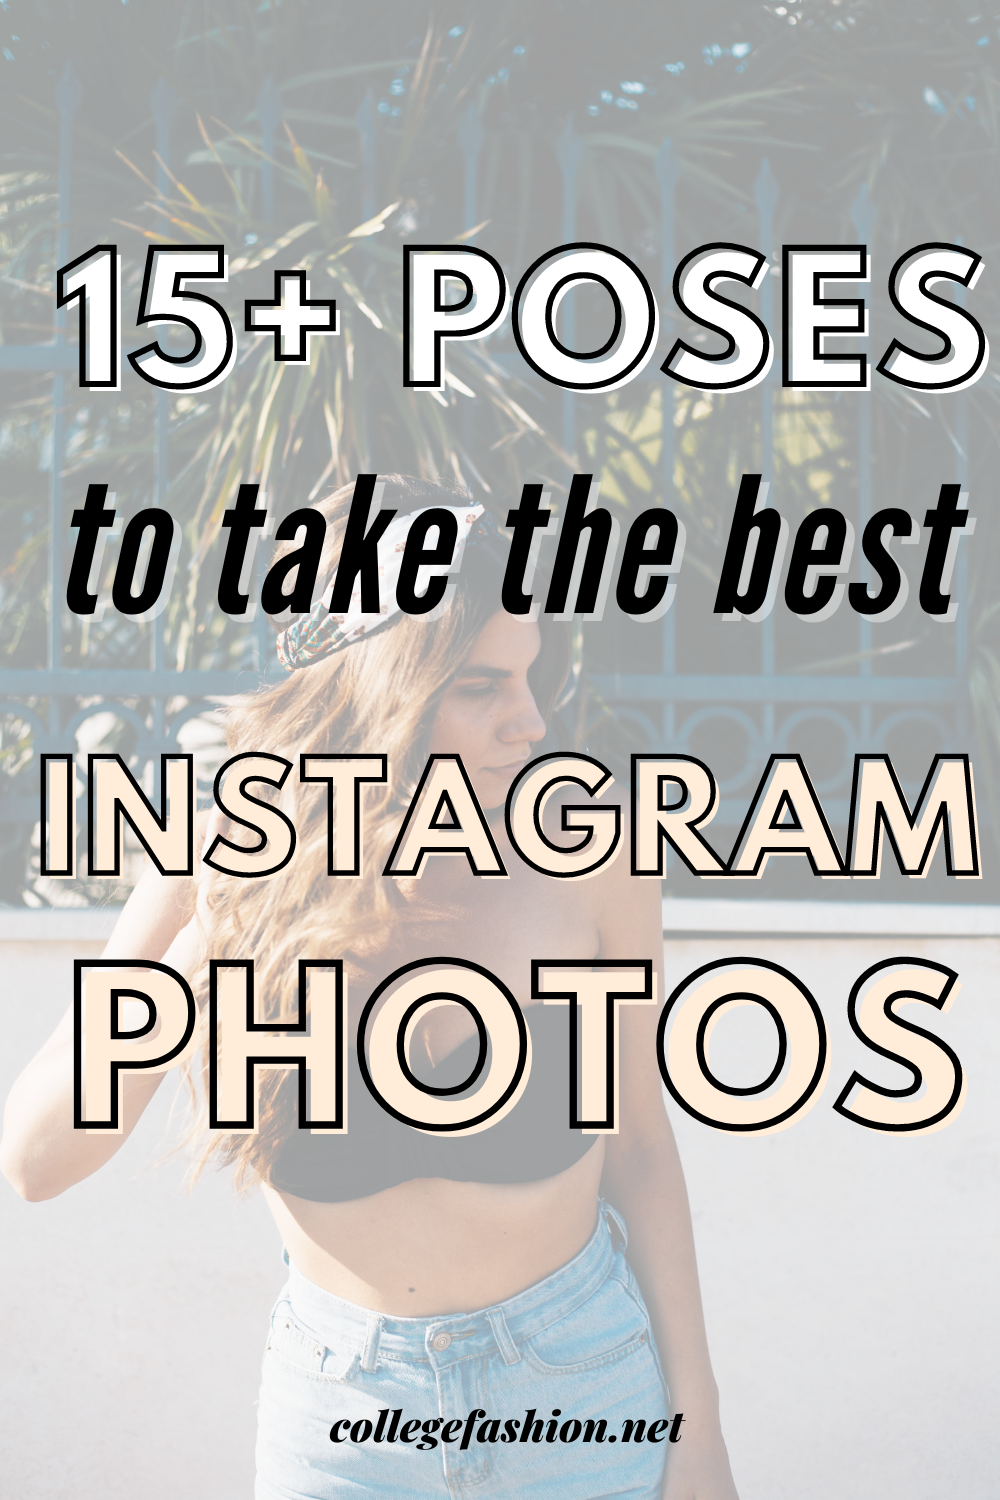 The best poses for girls' profile pictures, pic for profile - thirstymag.com